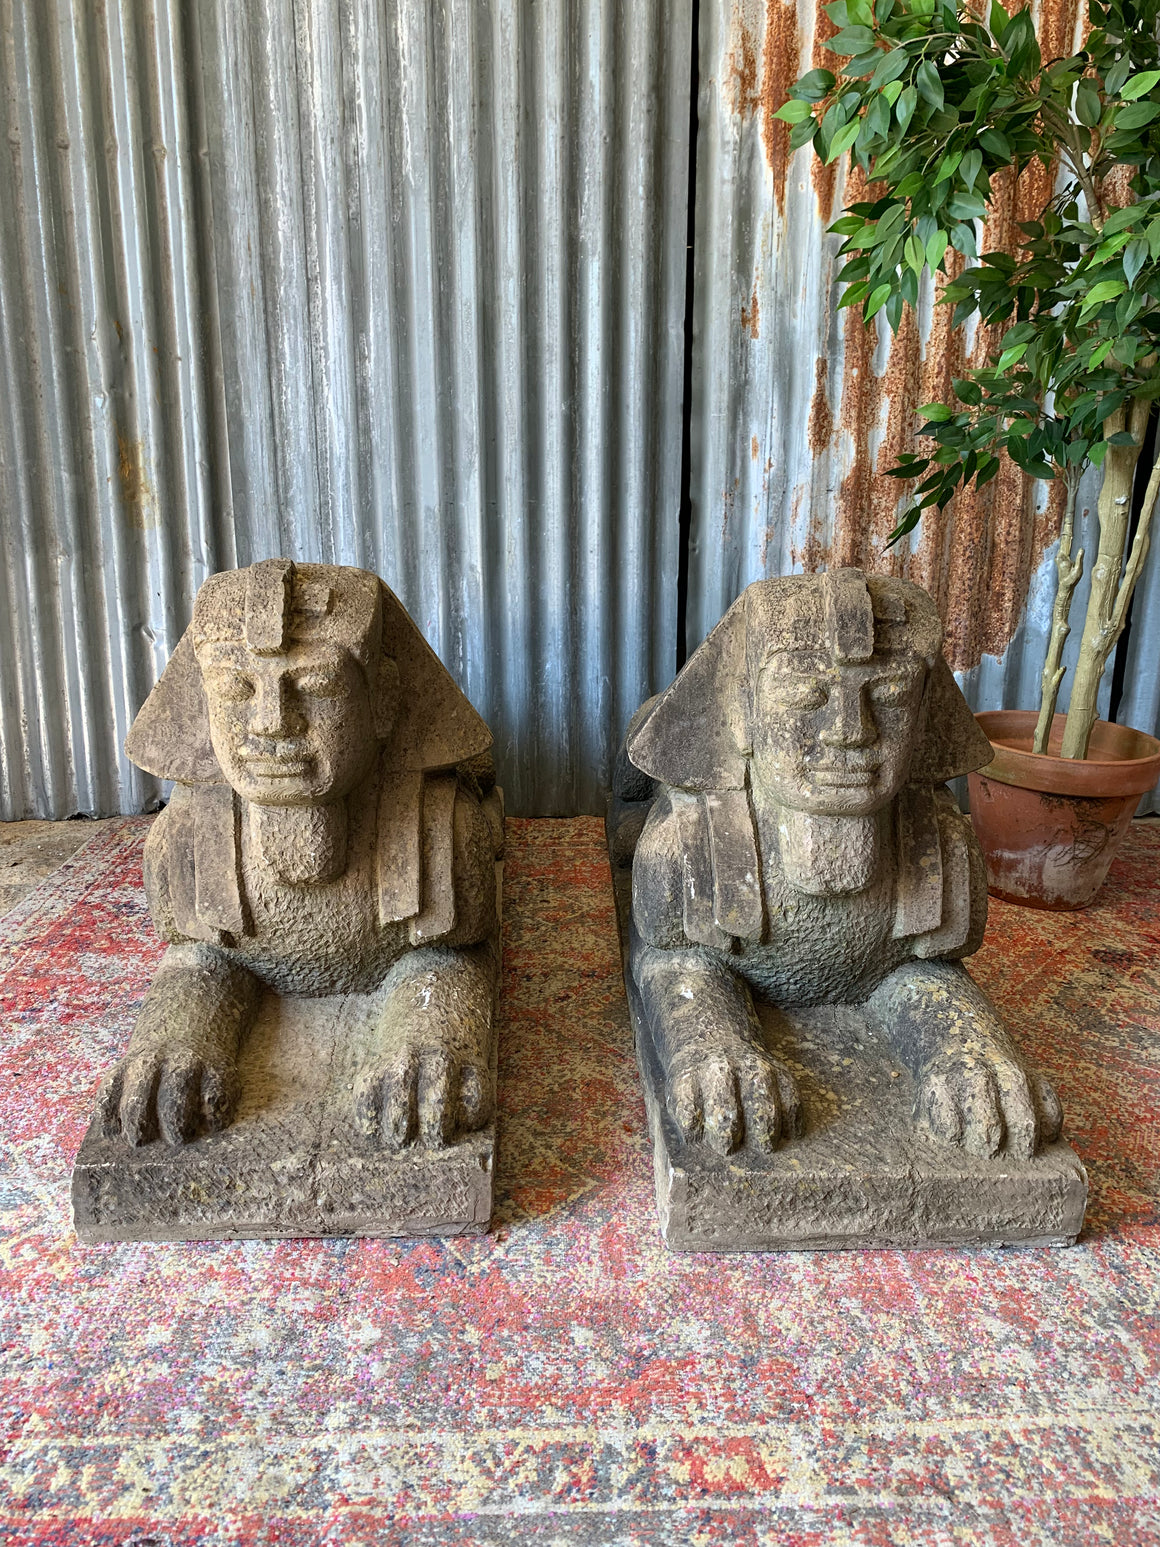 A pair of large faux stone Sphinx statues